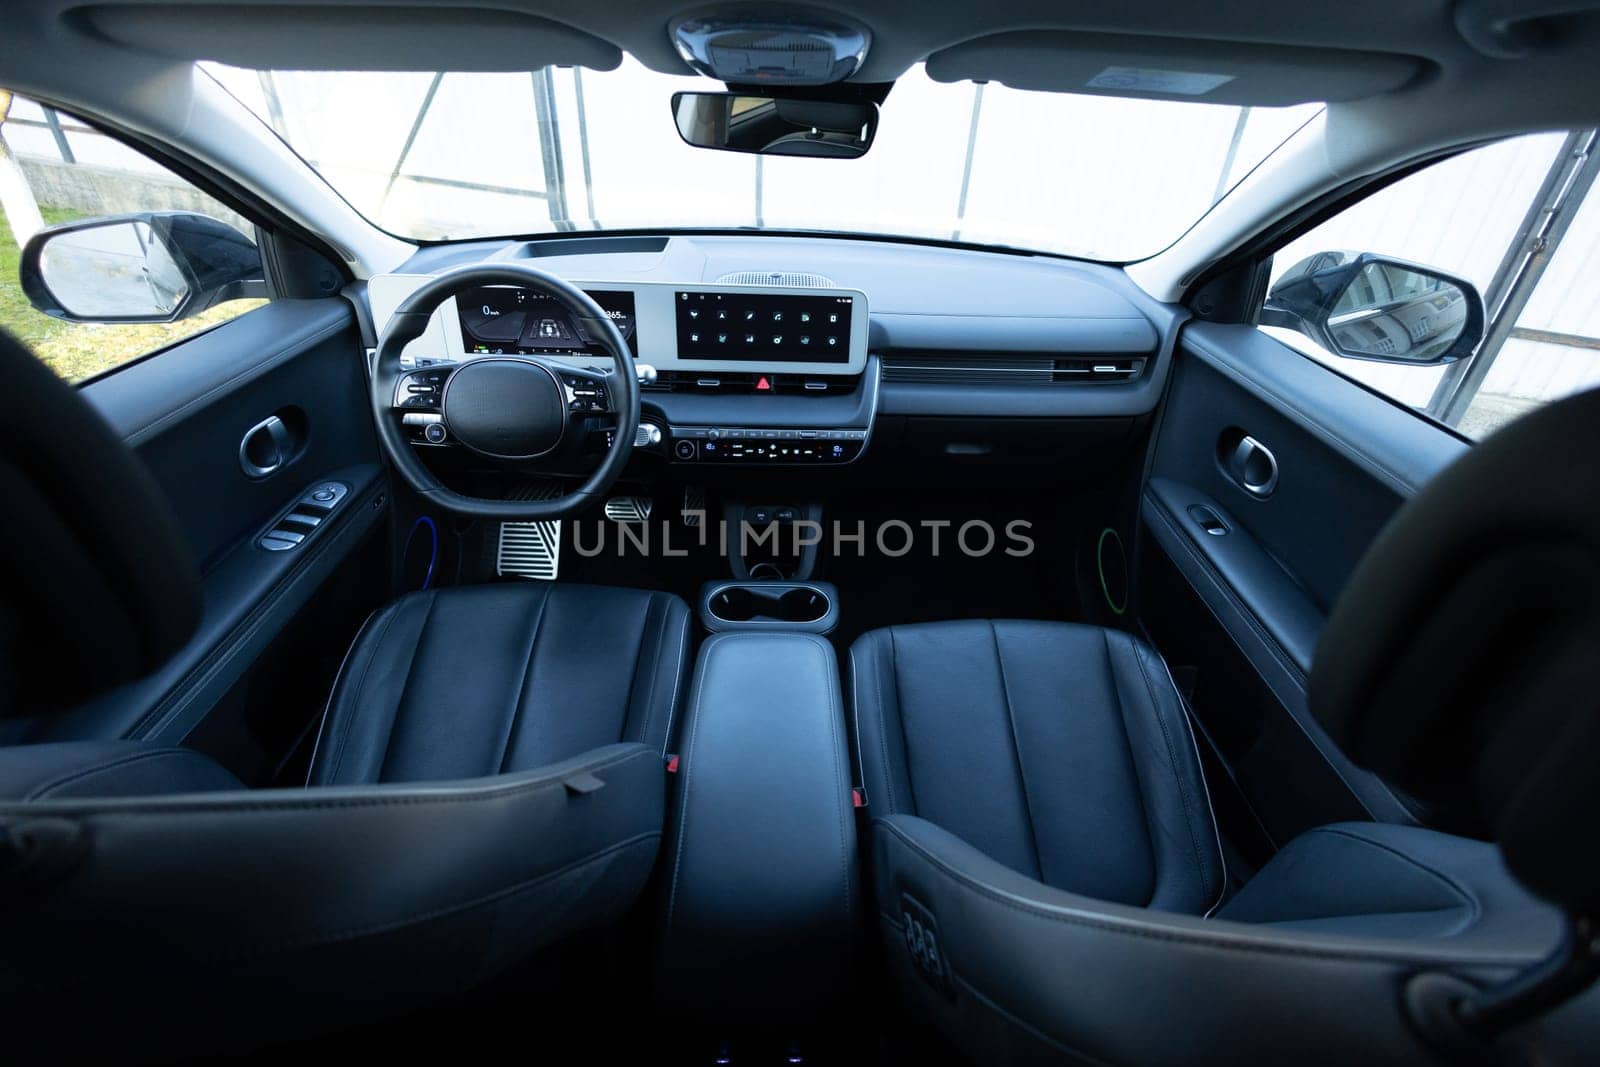 Electric car interior details adjustments. Inside car interior with front seats, driver and passenger, textile, windows, console, gear shift, electric buttons, digital speedometer, steering wheel